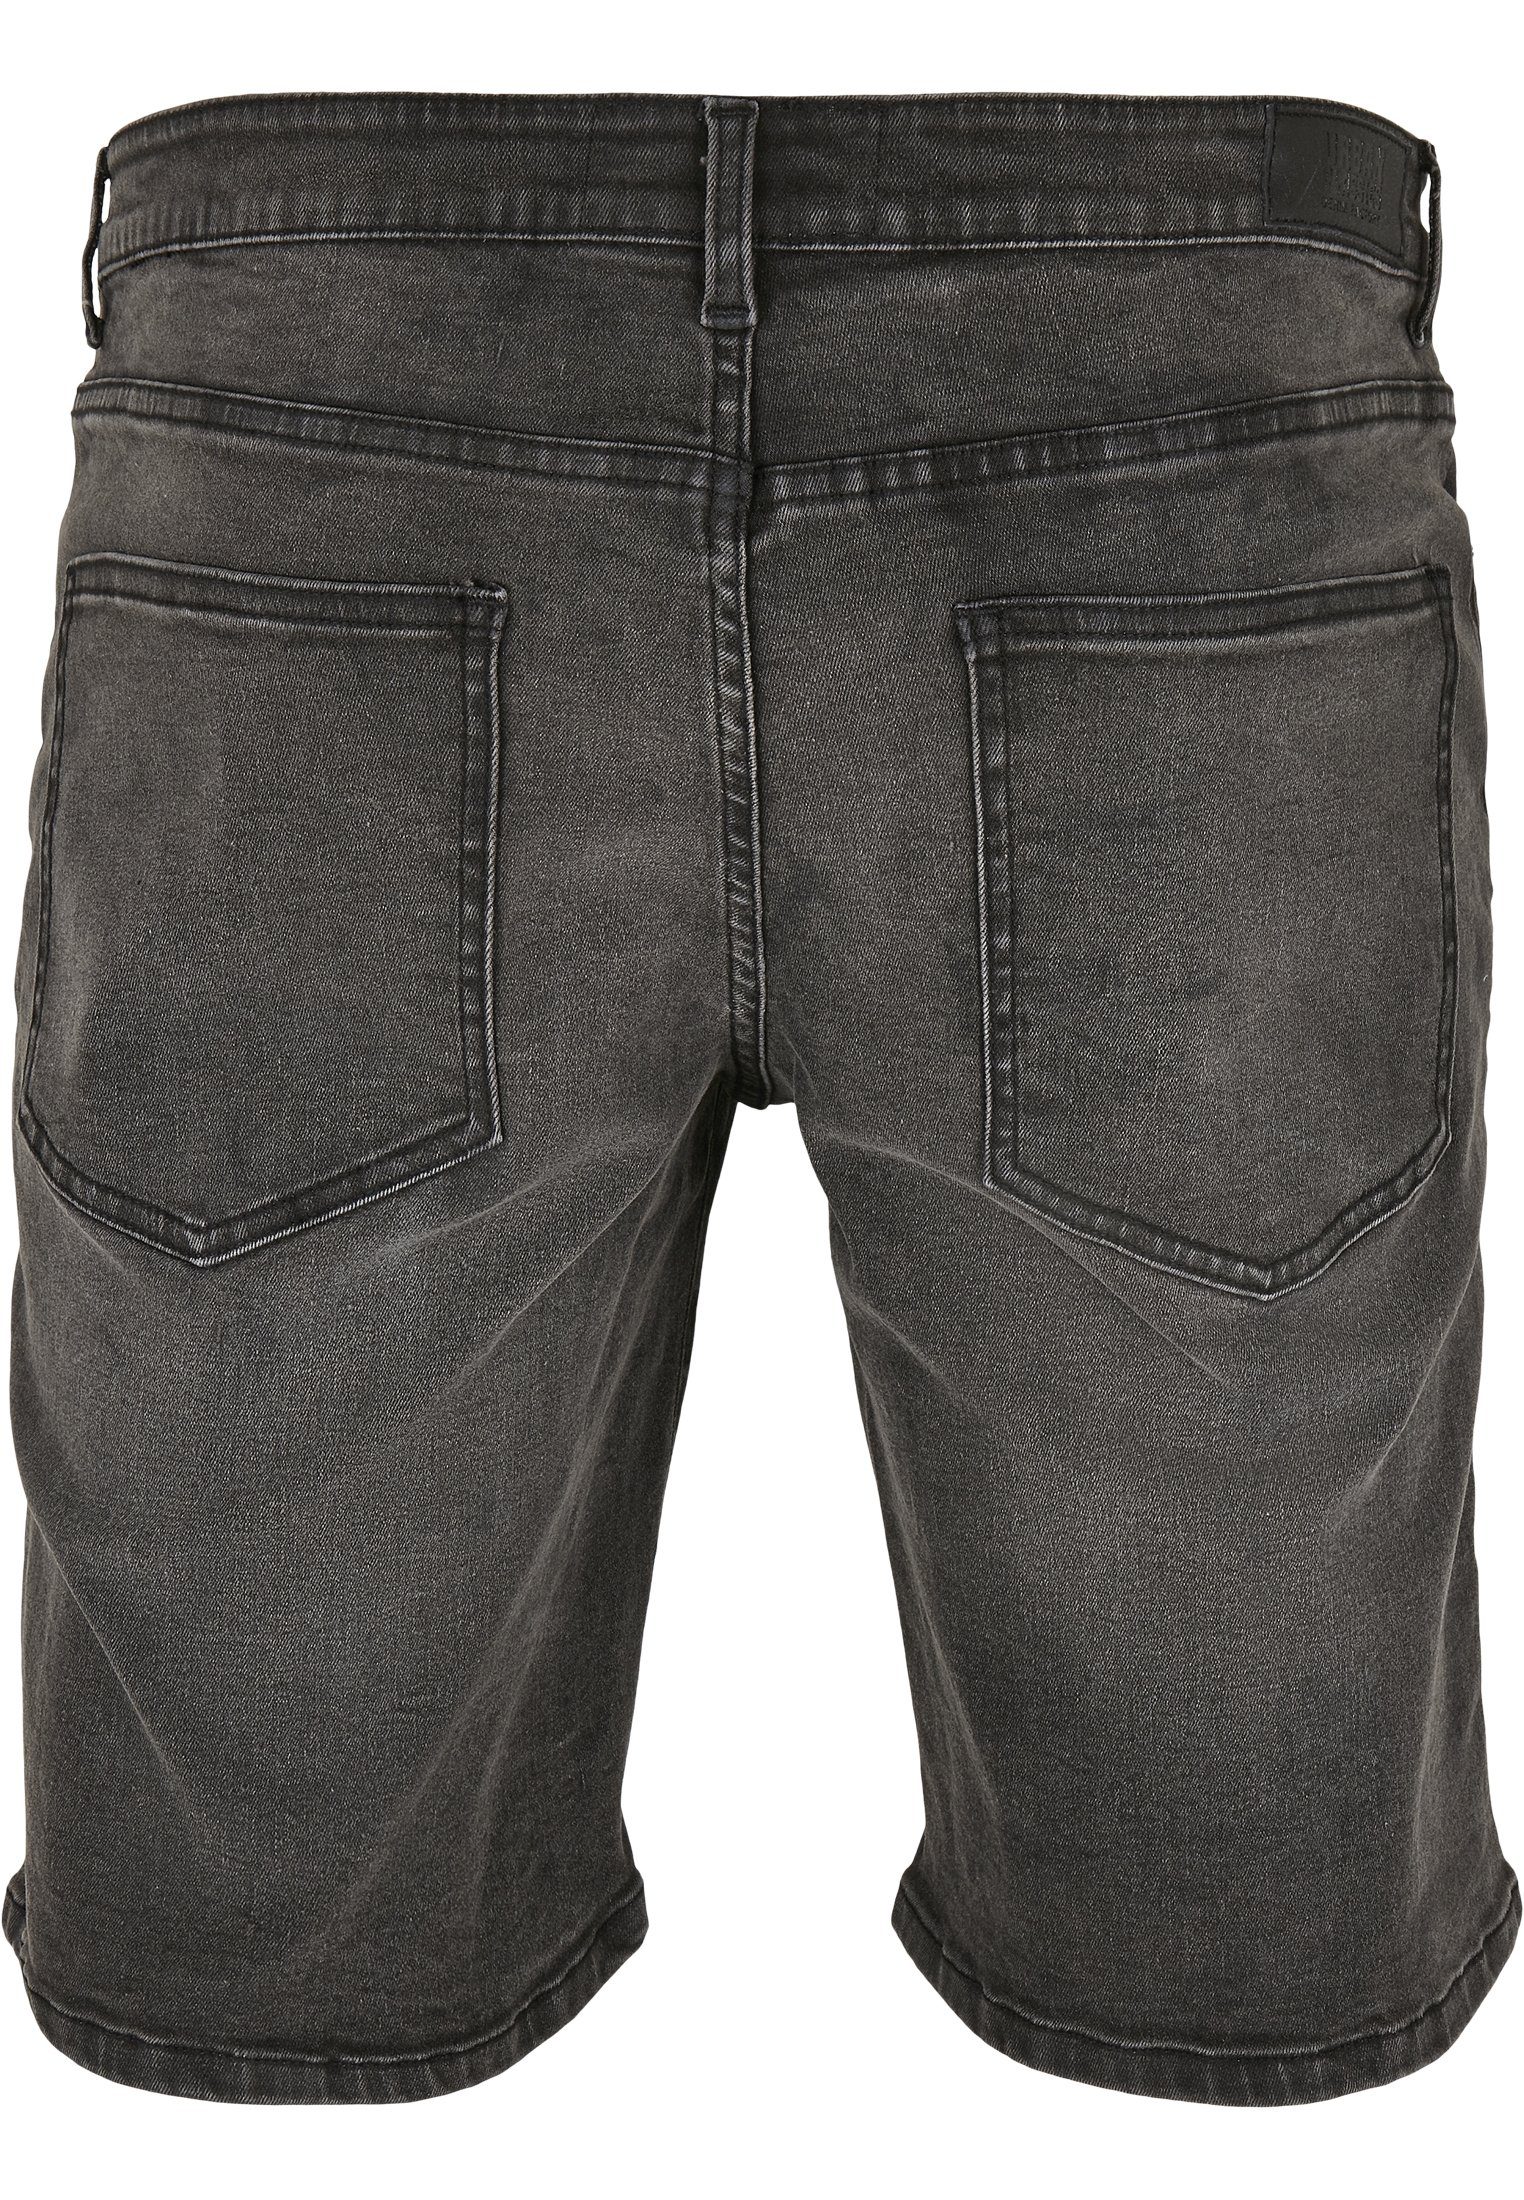 URBAN Relaxed realblack CLASSICS Fit washed Herren (1-tlg) Jeans Stoffhose Shorts